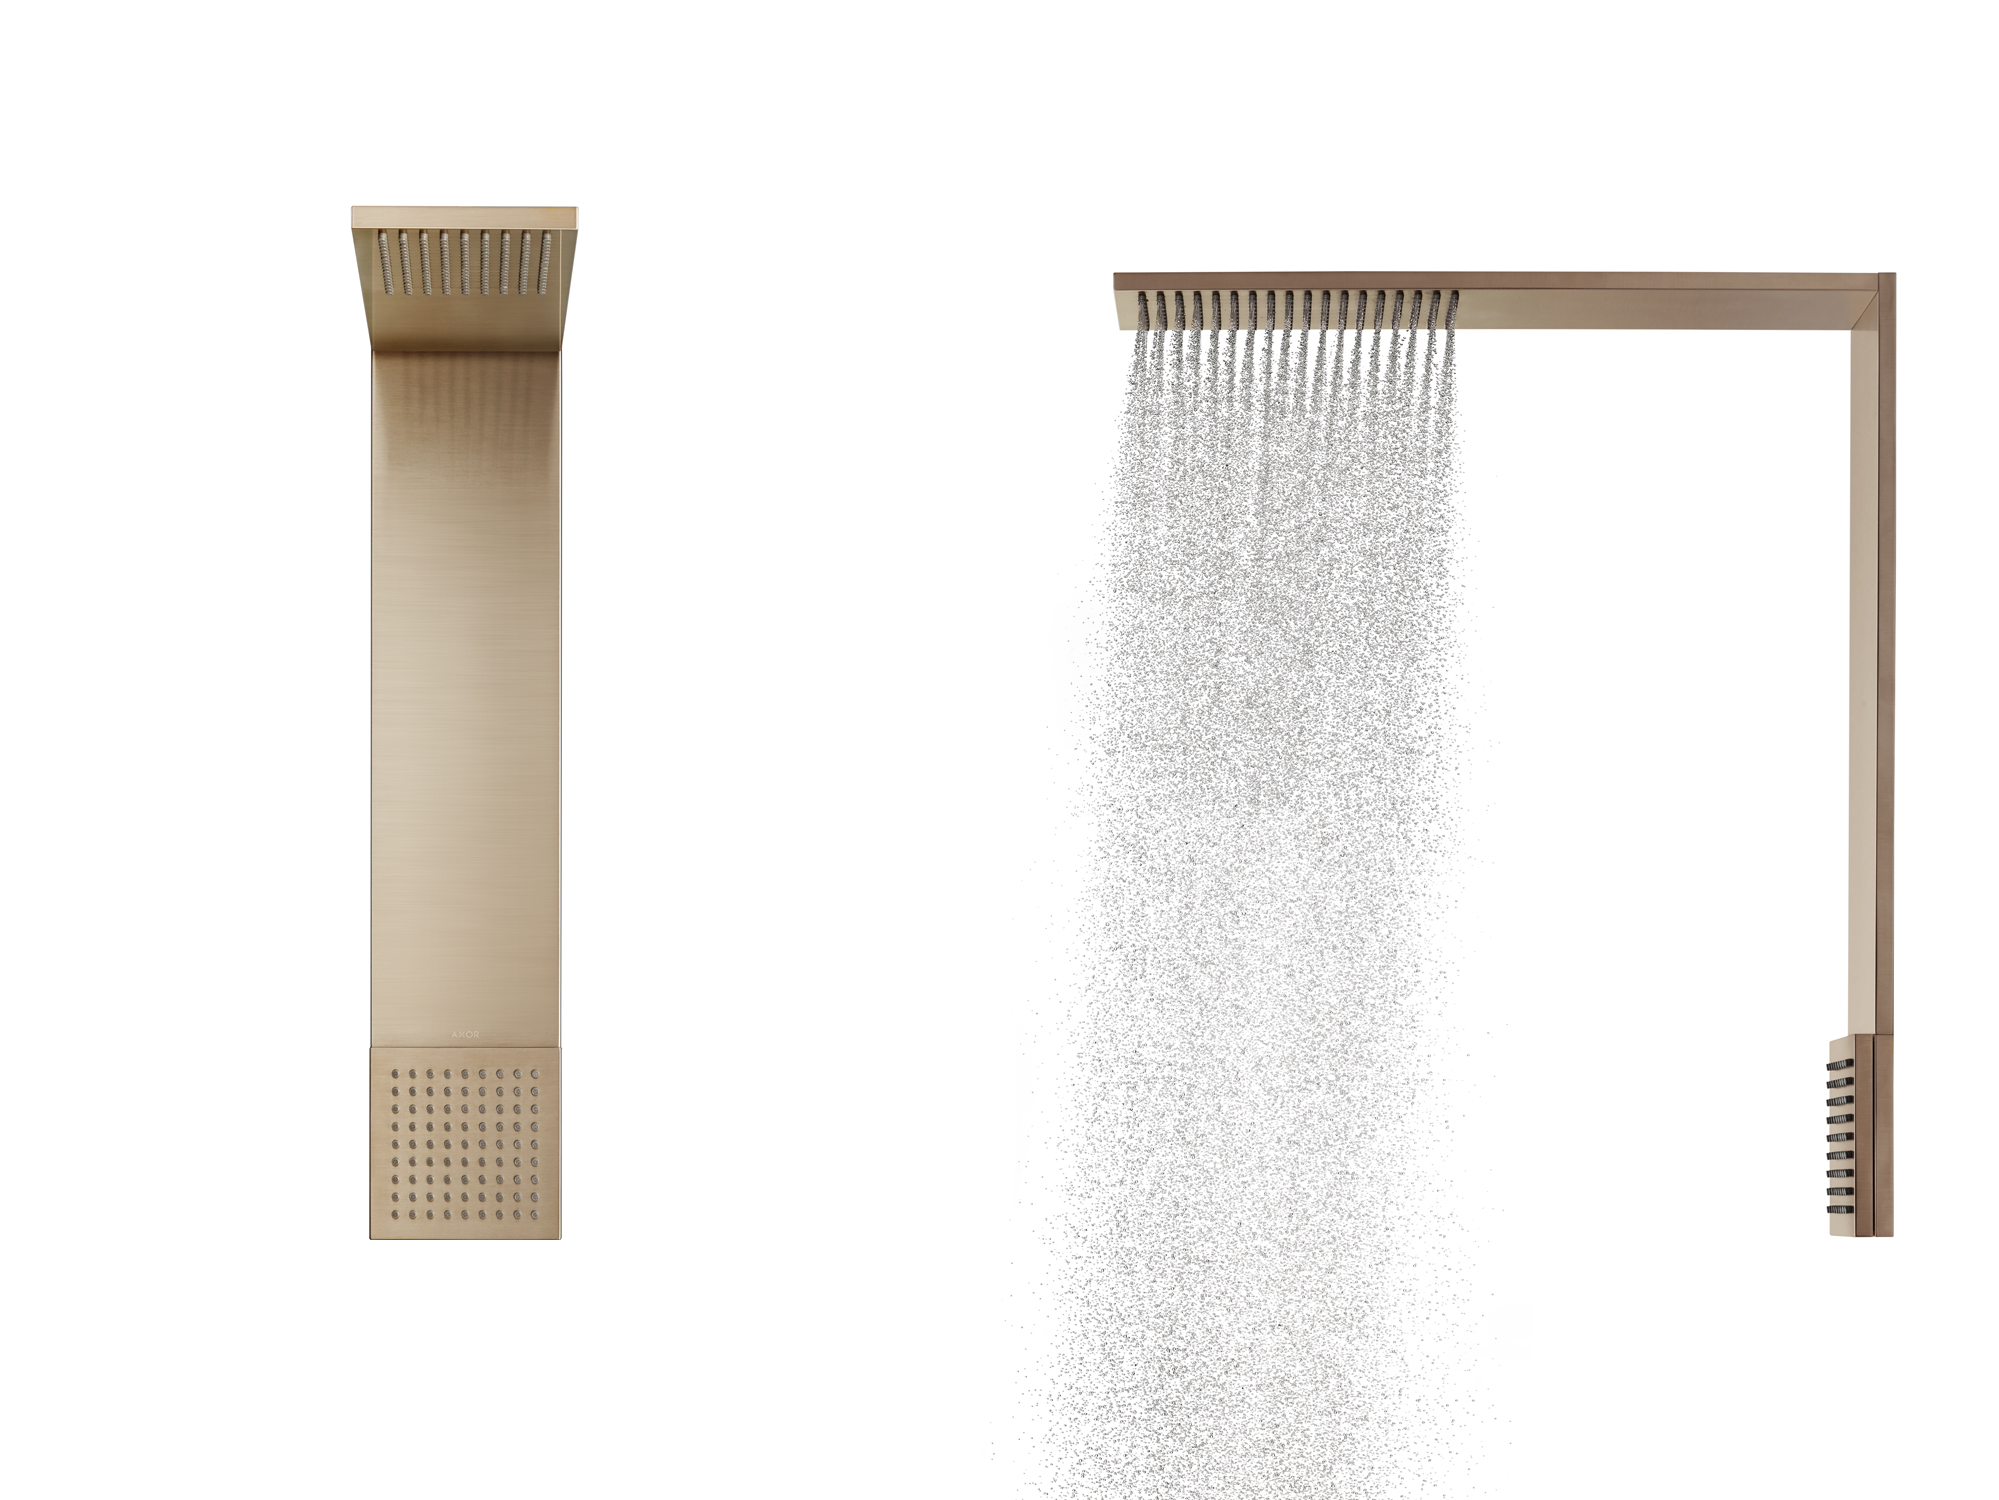 AXOR ShowerComposition Showers